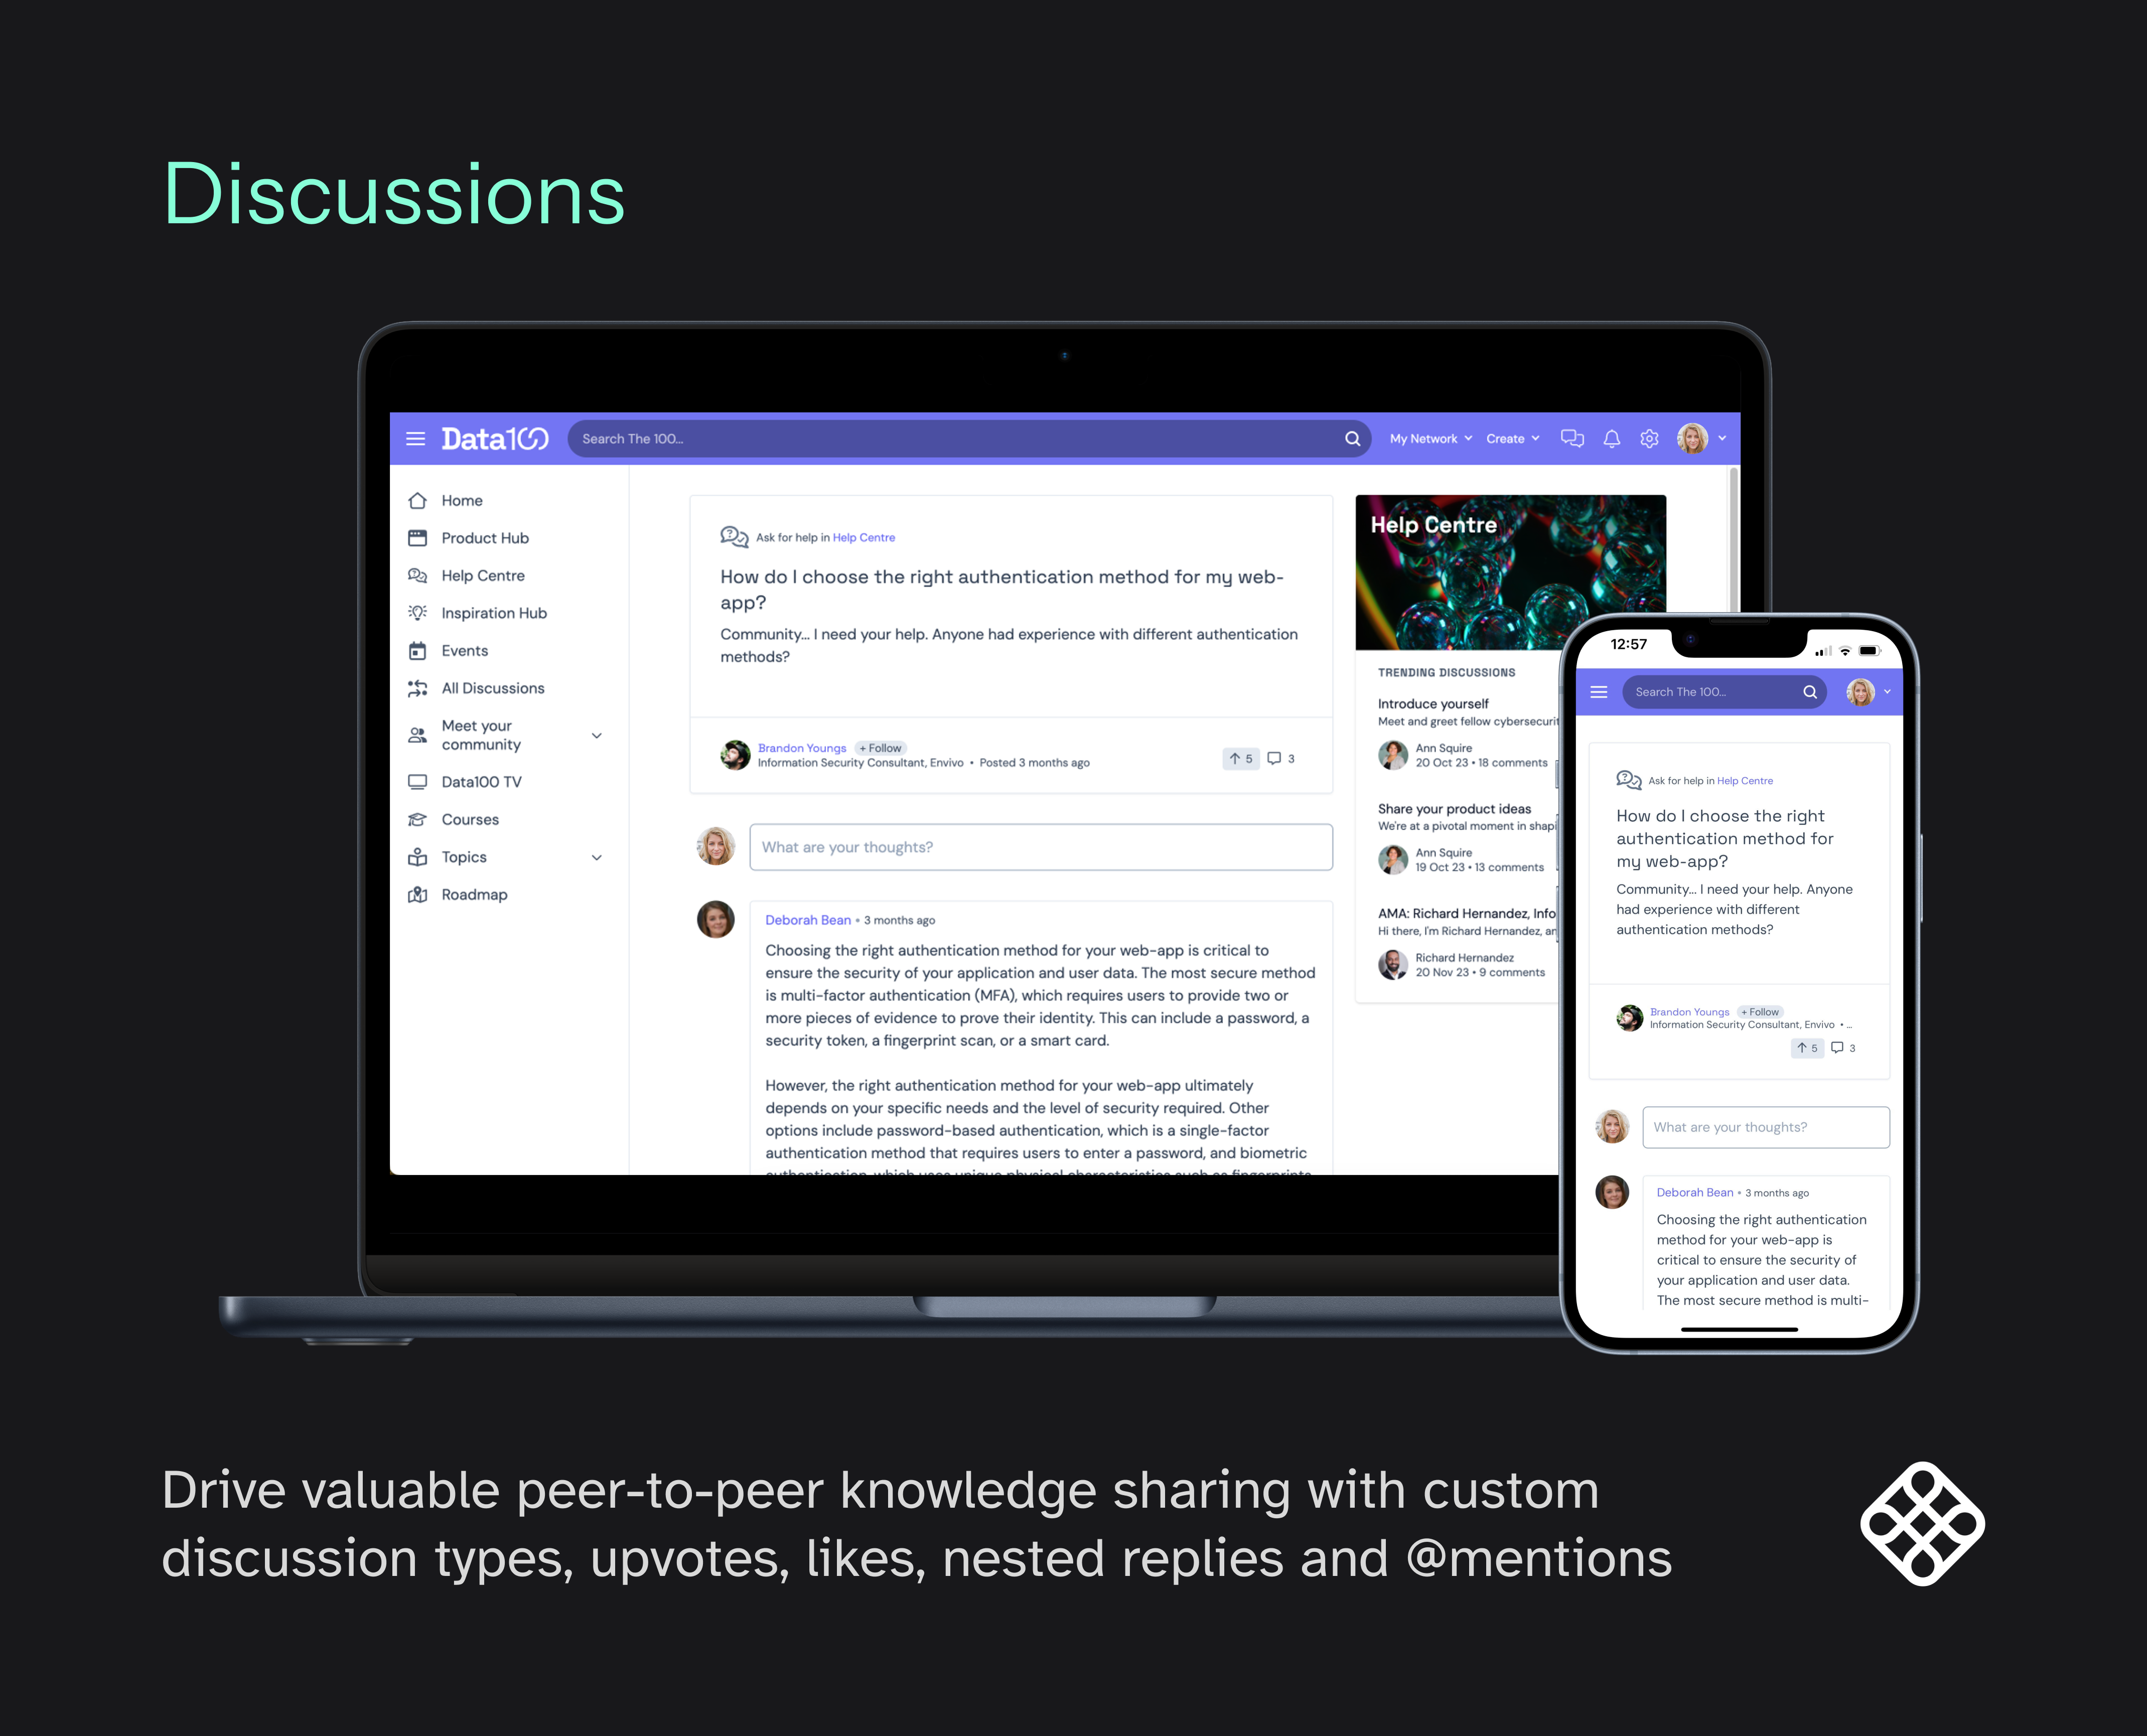 Drive valuable peer-to-peer knowledge sharing with custom discussion types, upvotes, likes, nested replies and @mentions